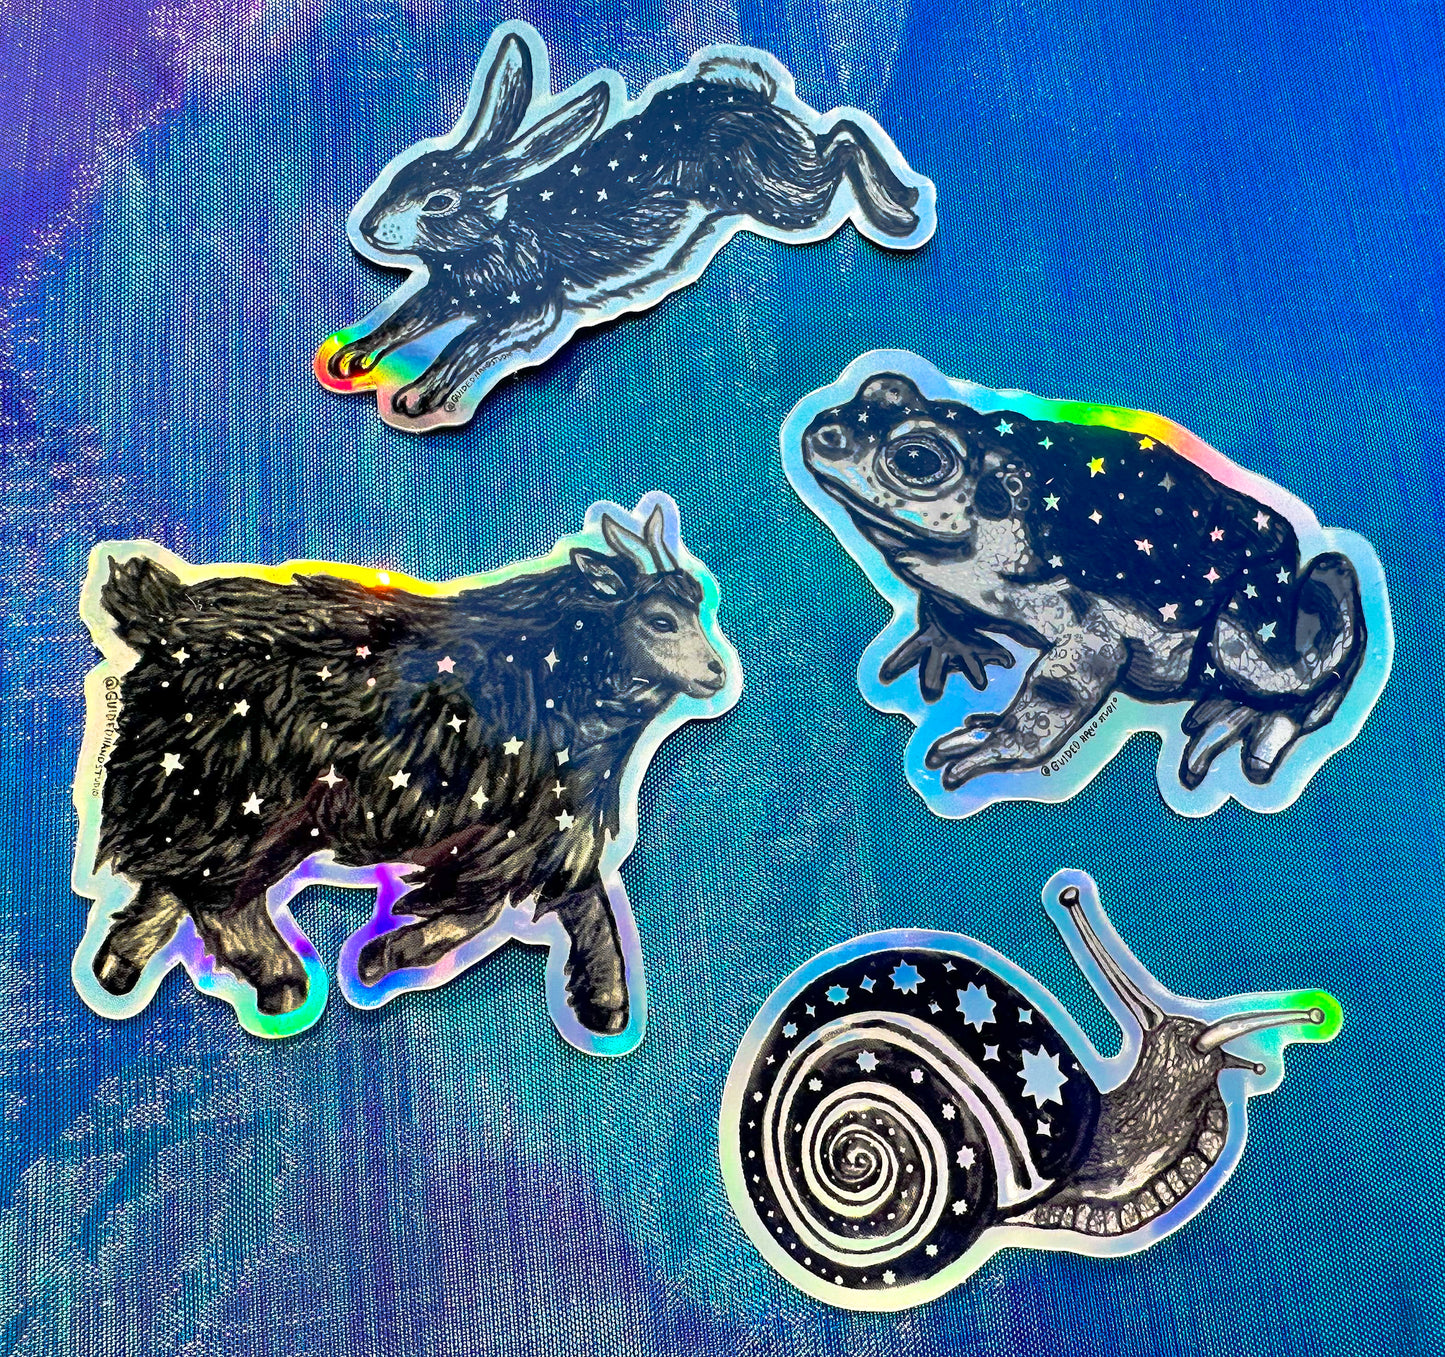 Holographic Toad Sticker